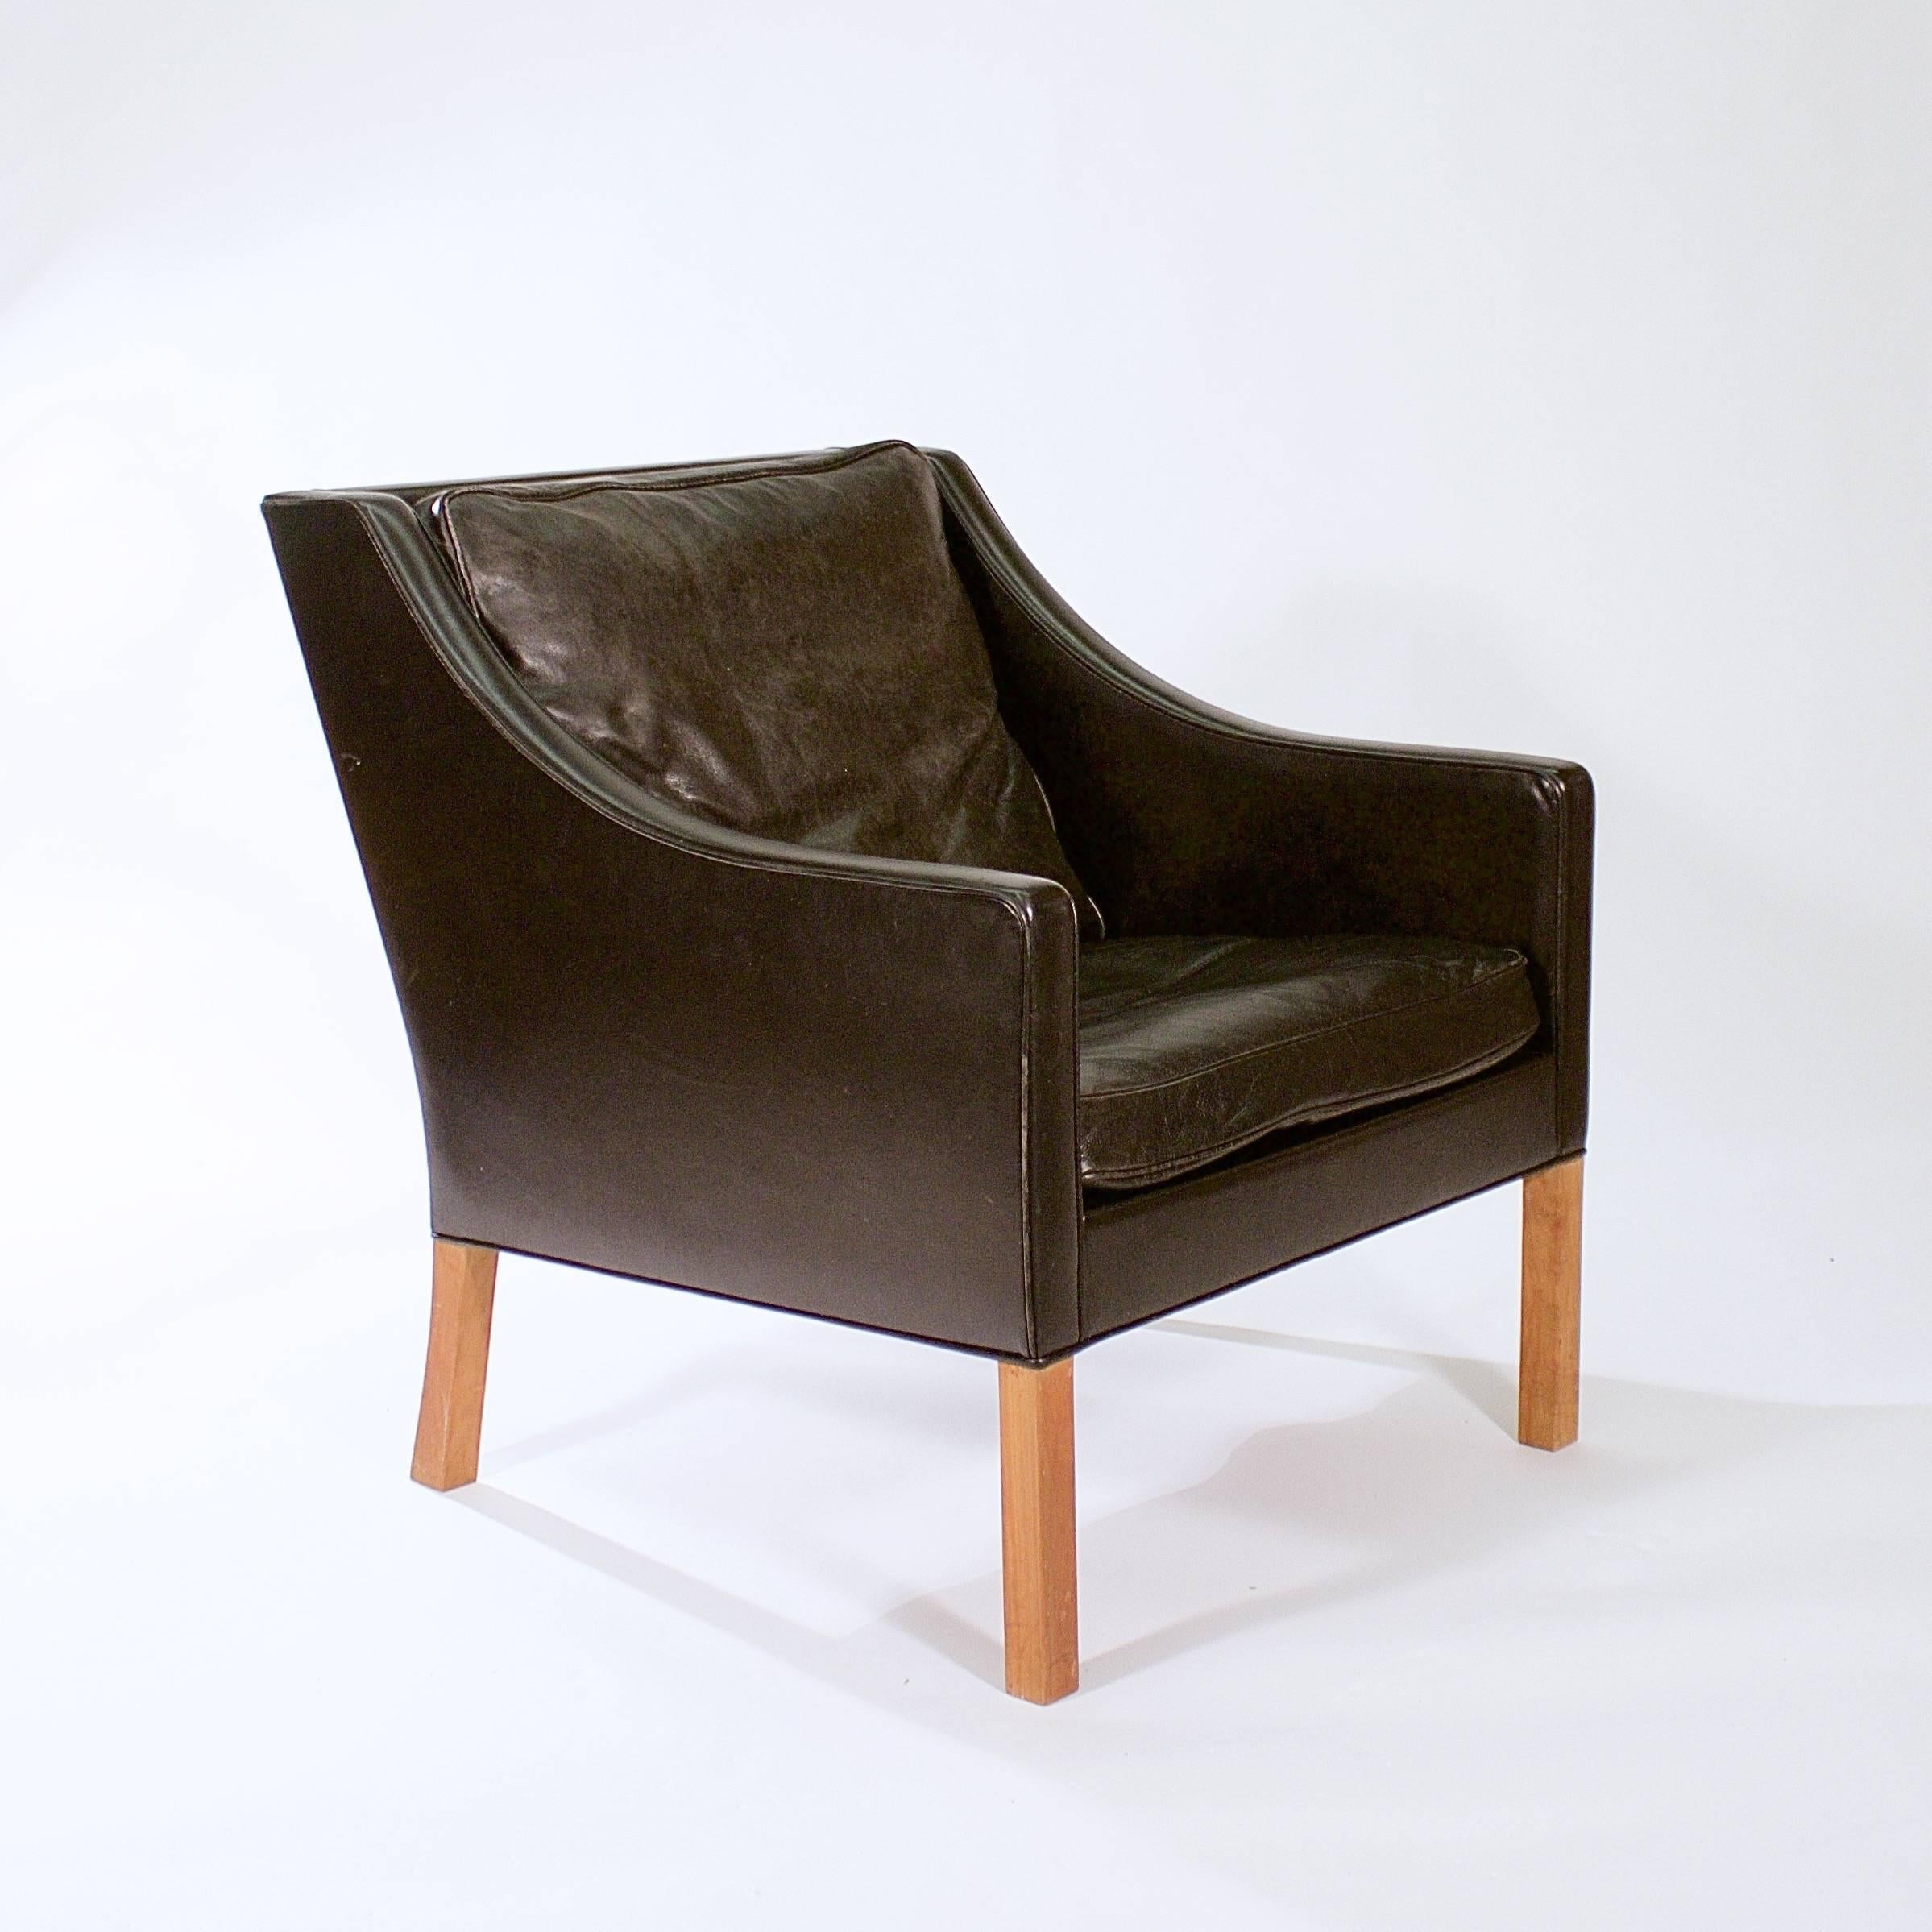 A pair of model 2207-22 black leather armchairs by Borge Mogensen (1914 - 1972).

Designed for Fredericia. Denmark, circa 1960s